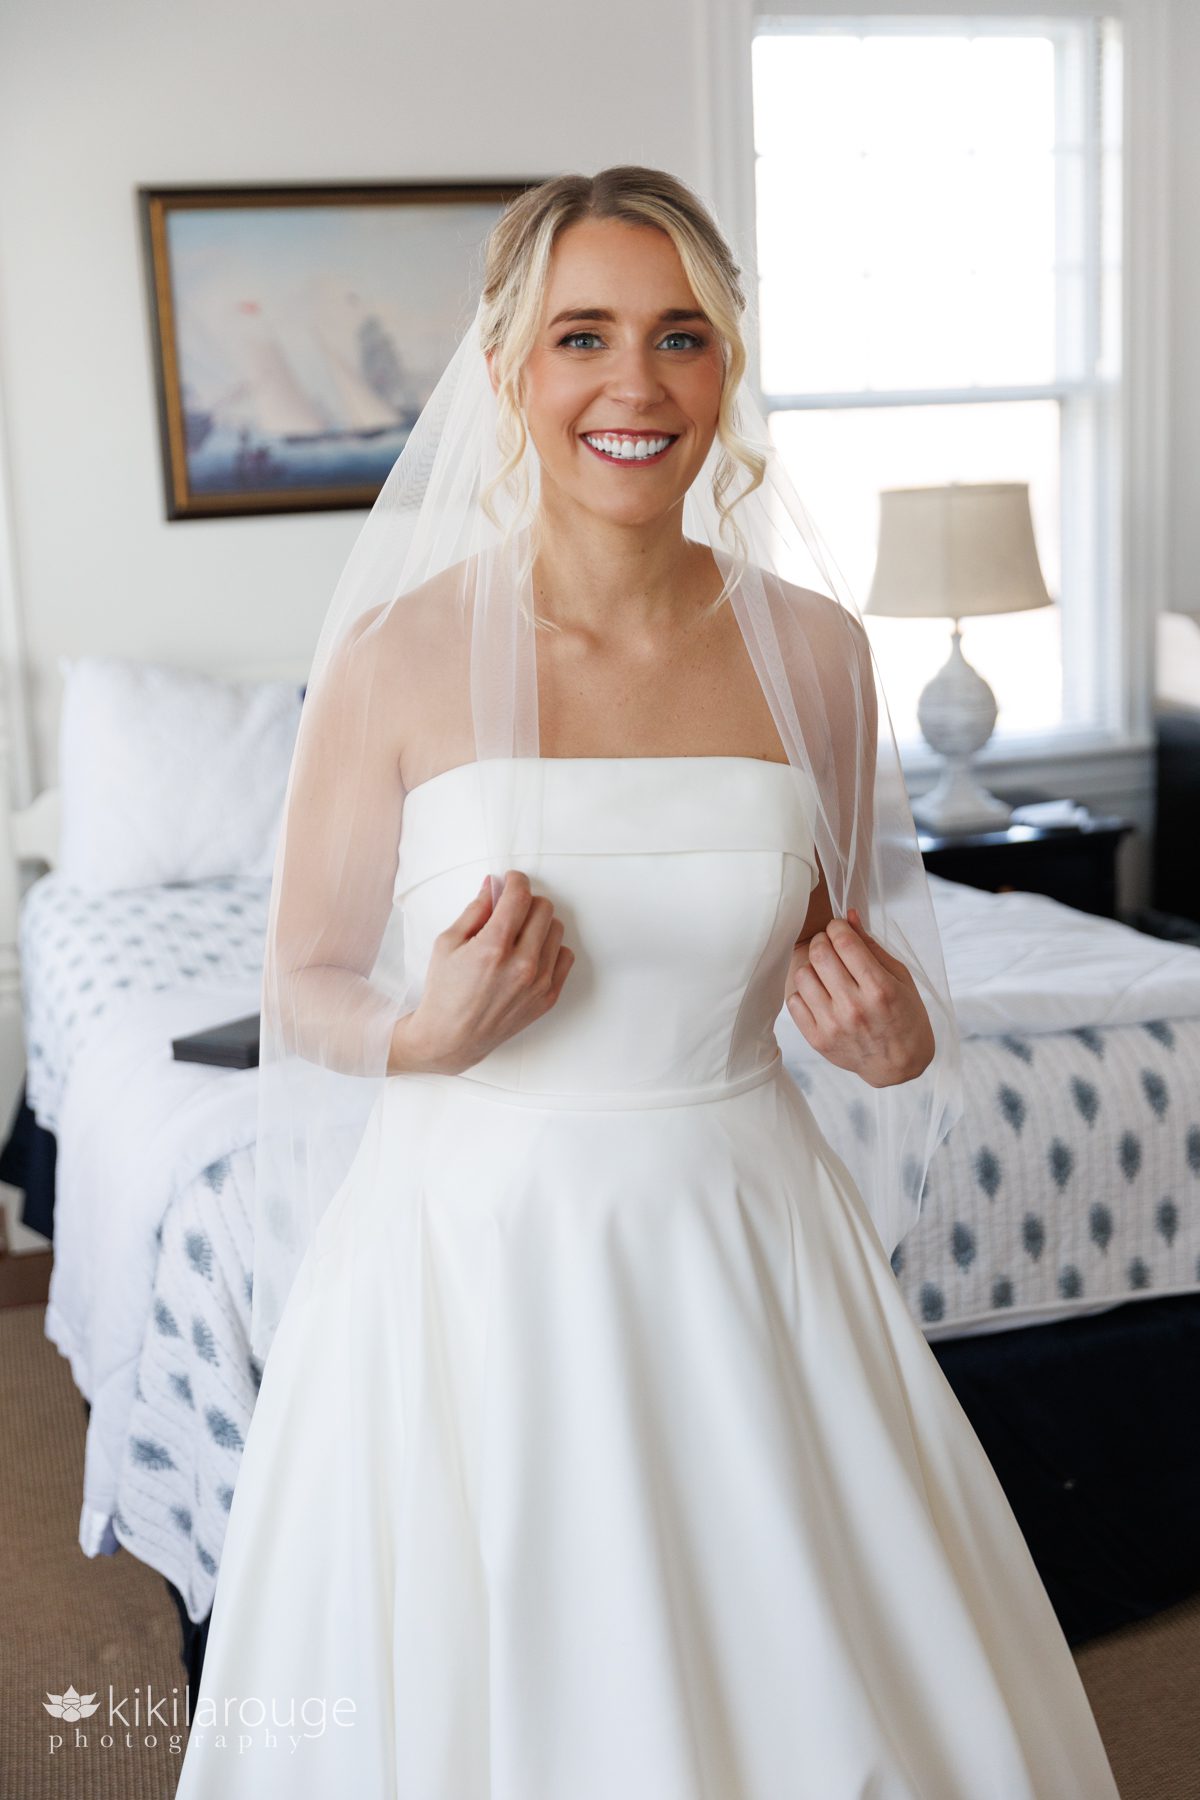 Bride in wedding dress holding veil with both hands smiling